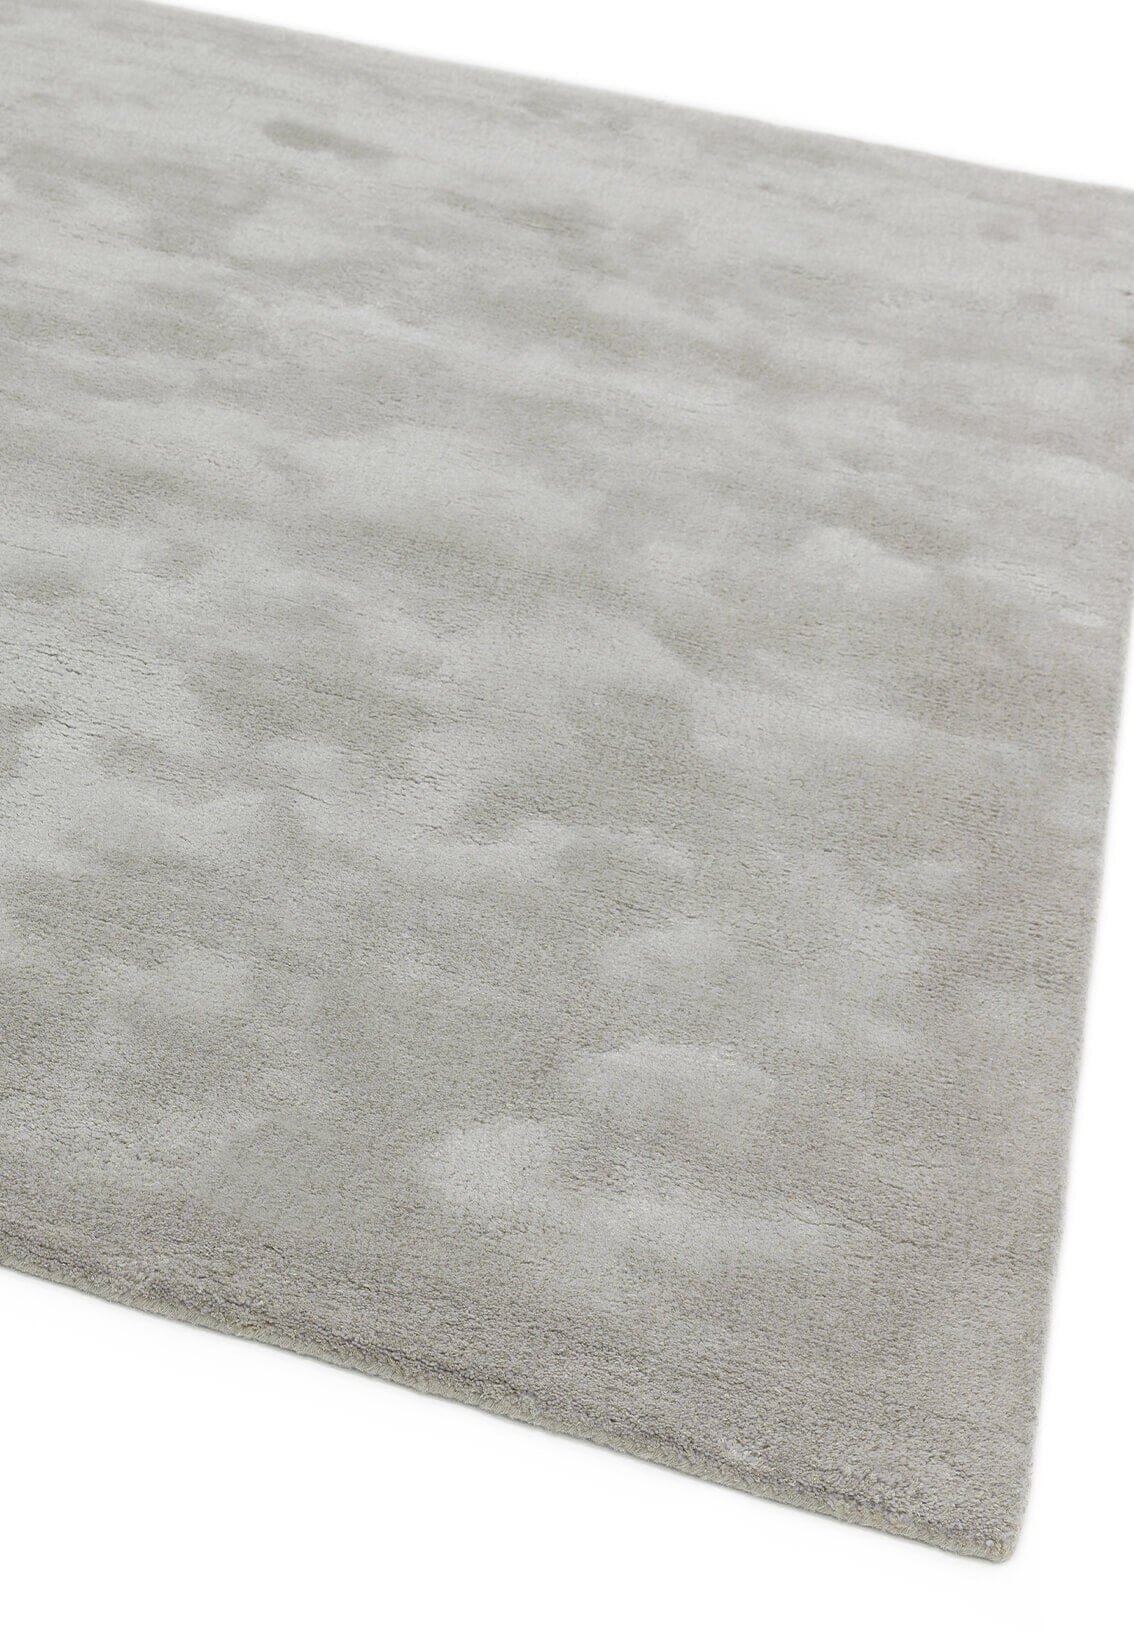  Asiatic Carpets-Asiatic Carpets Aran Hand Woven Rug Feather Grey - 160 x 230cm-Grey, Silver 997 